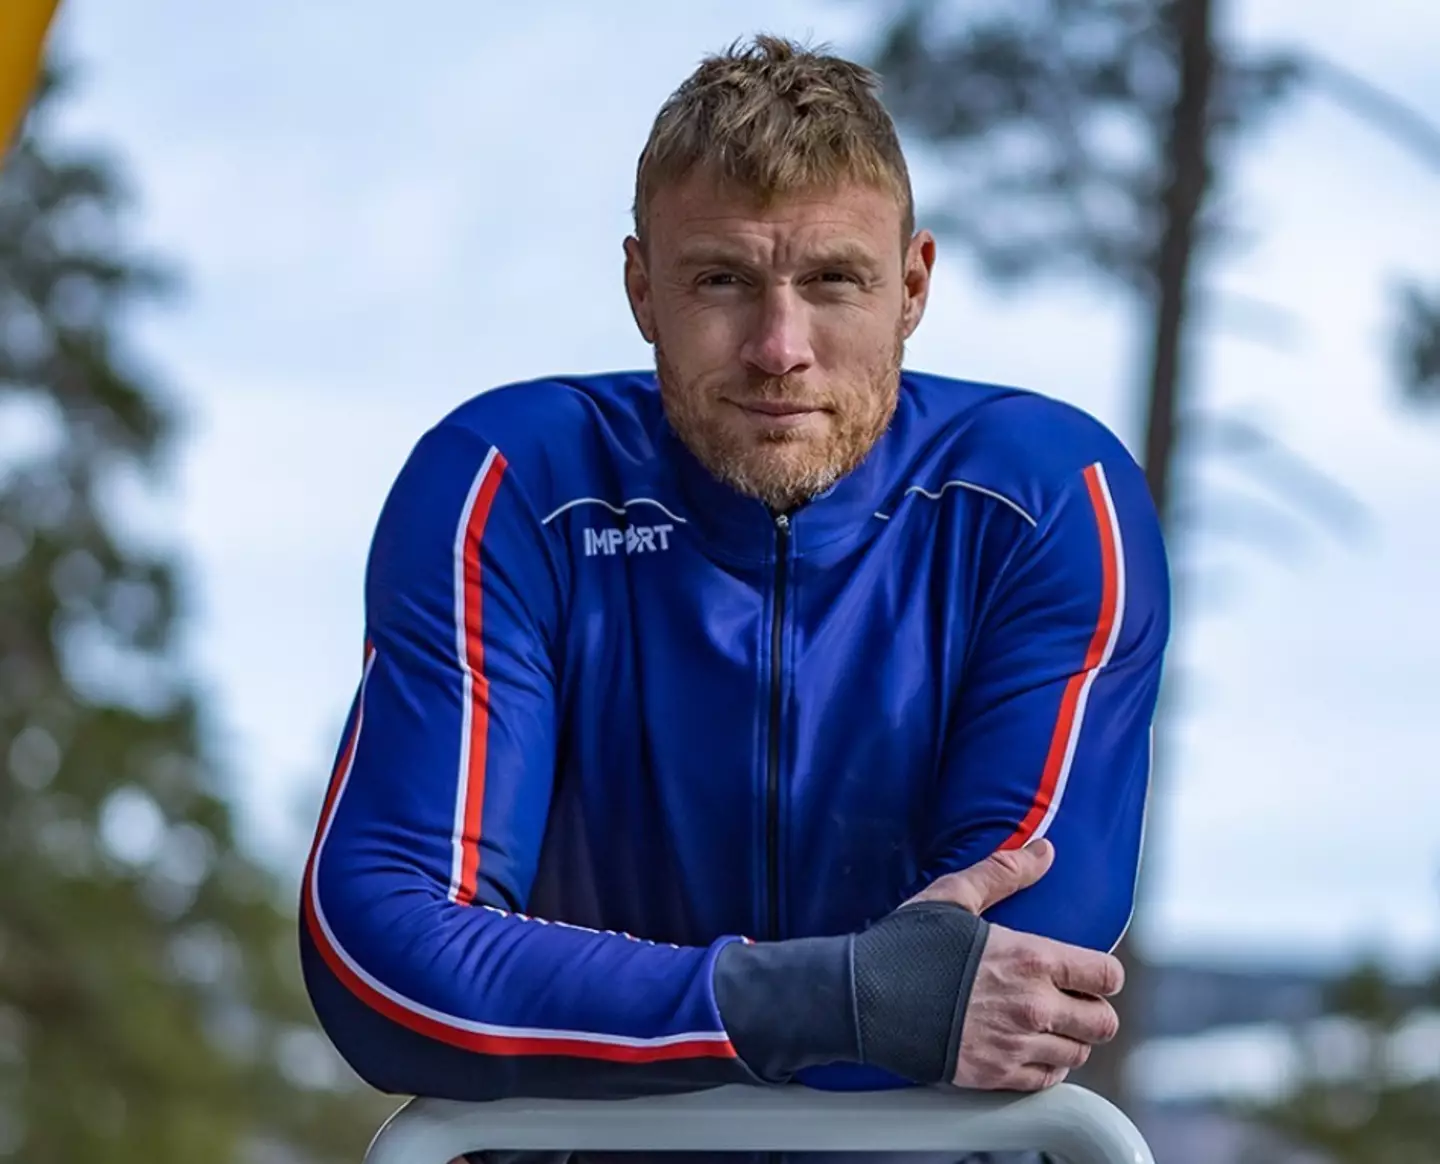 The BBC has apologised to Flintoff.